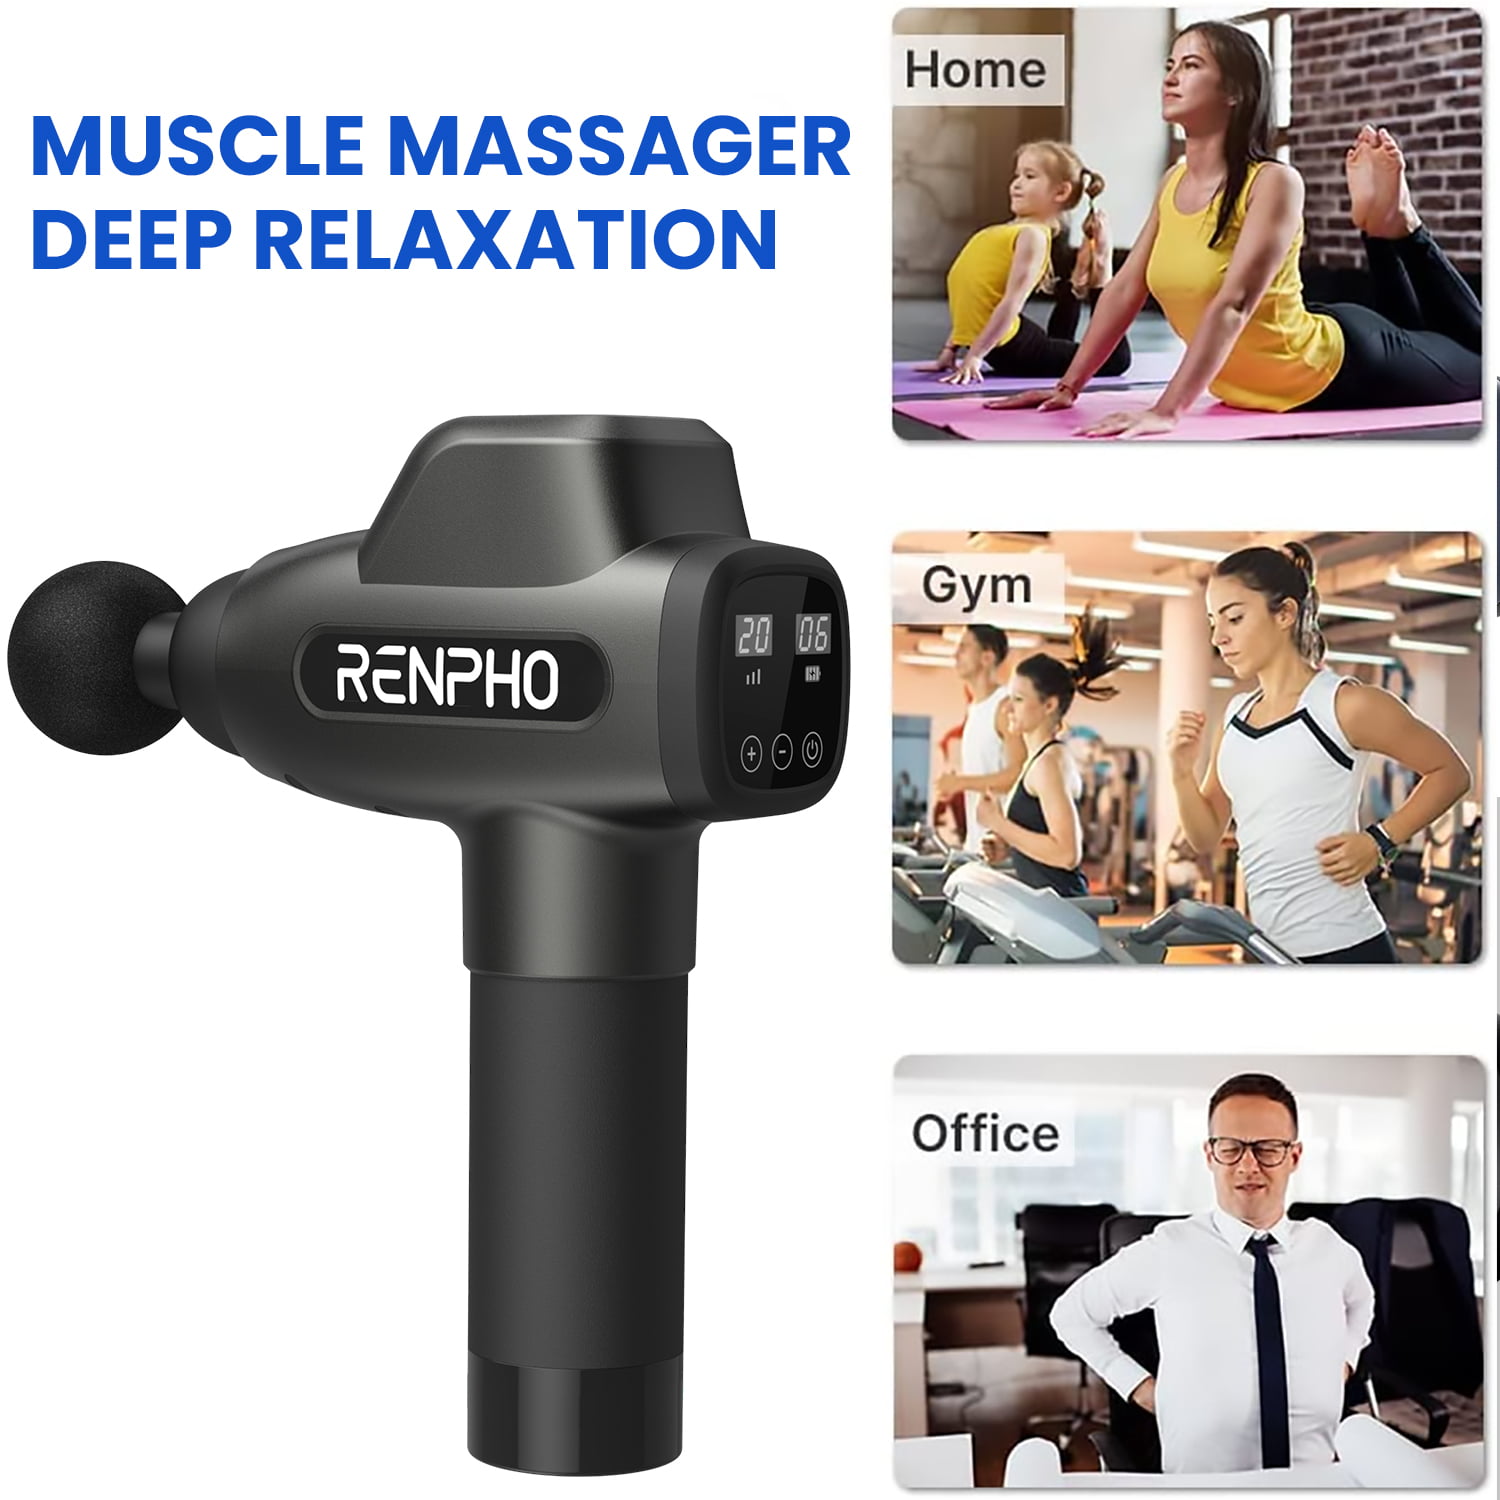 Renpho Muscle Massage Gun for Athletes Pain Relief